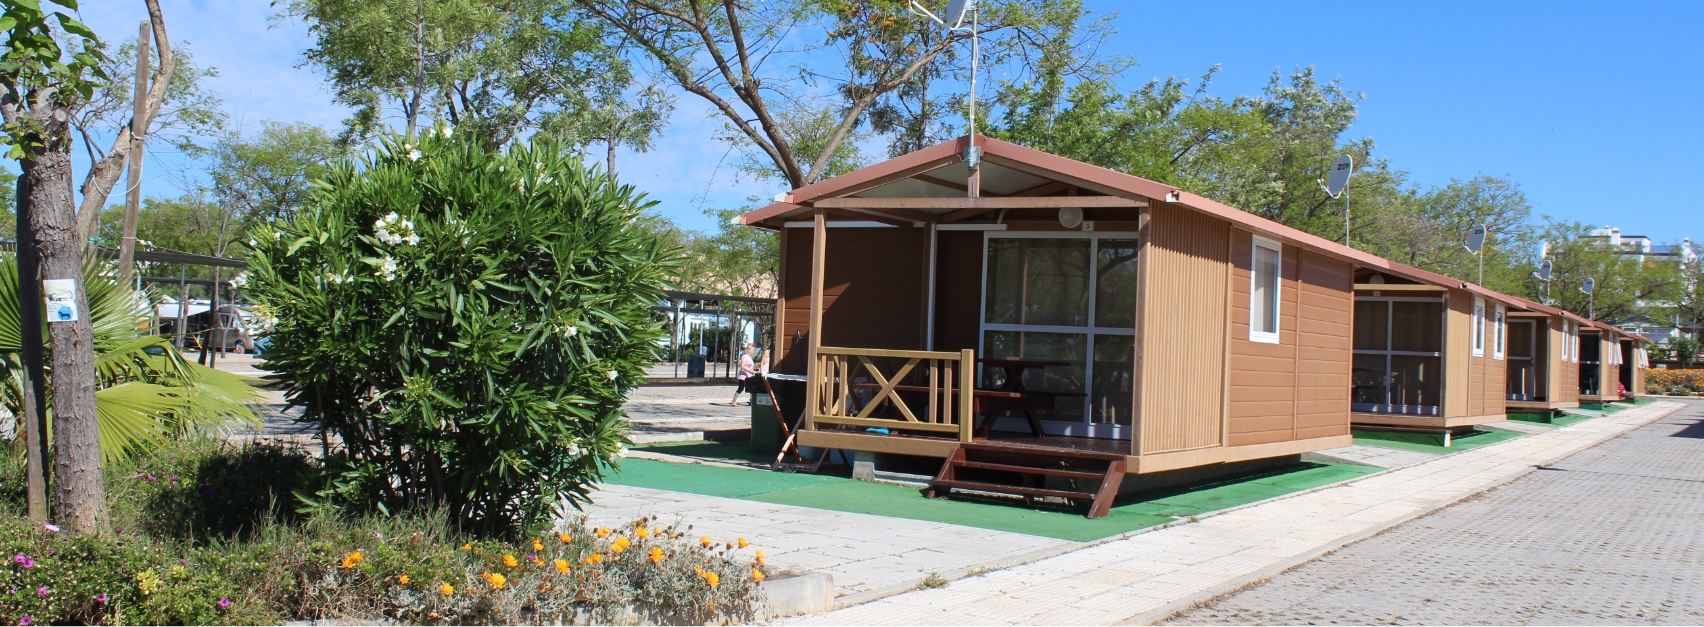 Camping Bungalows - Our offer of accommodation in Bungalows - Camping Ria Formosa in Algarve